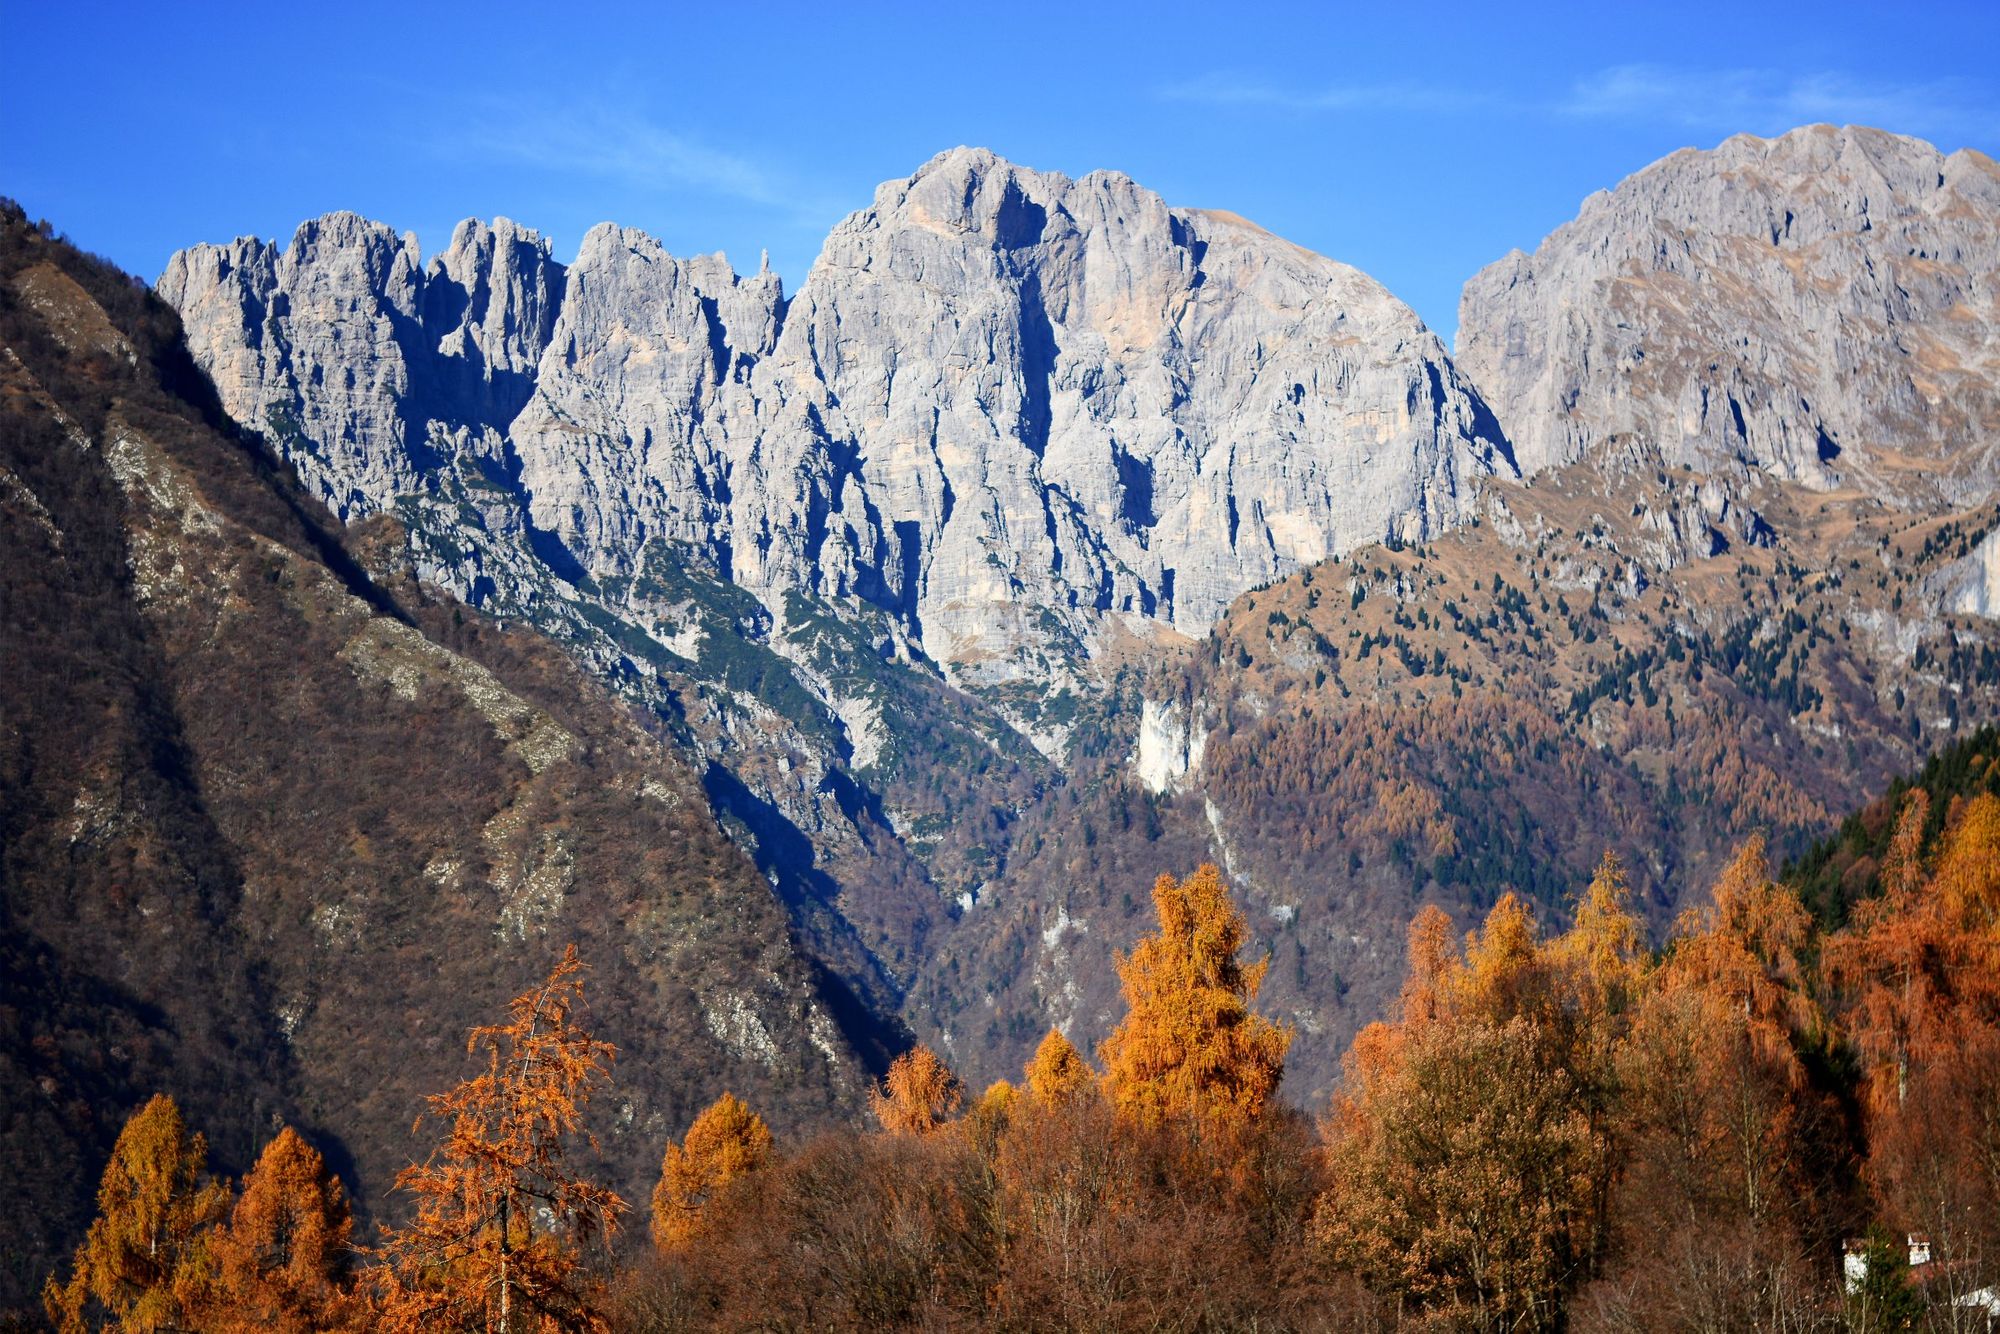 A view of Kinder ScoutThe Autumn light hits the Schiara rock group. Photo: Getty